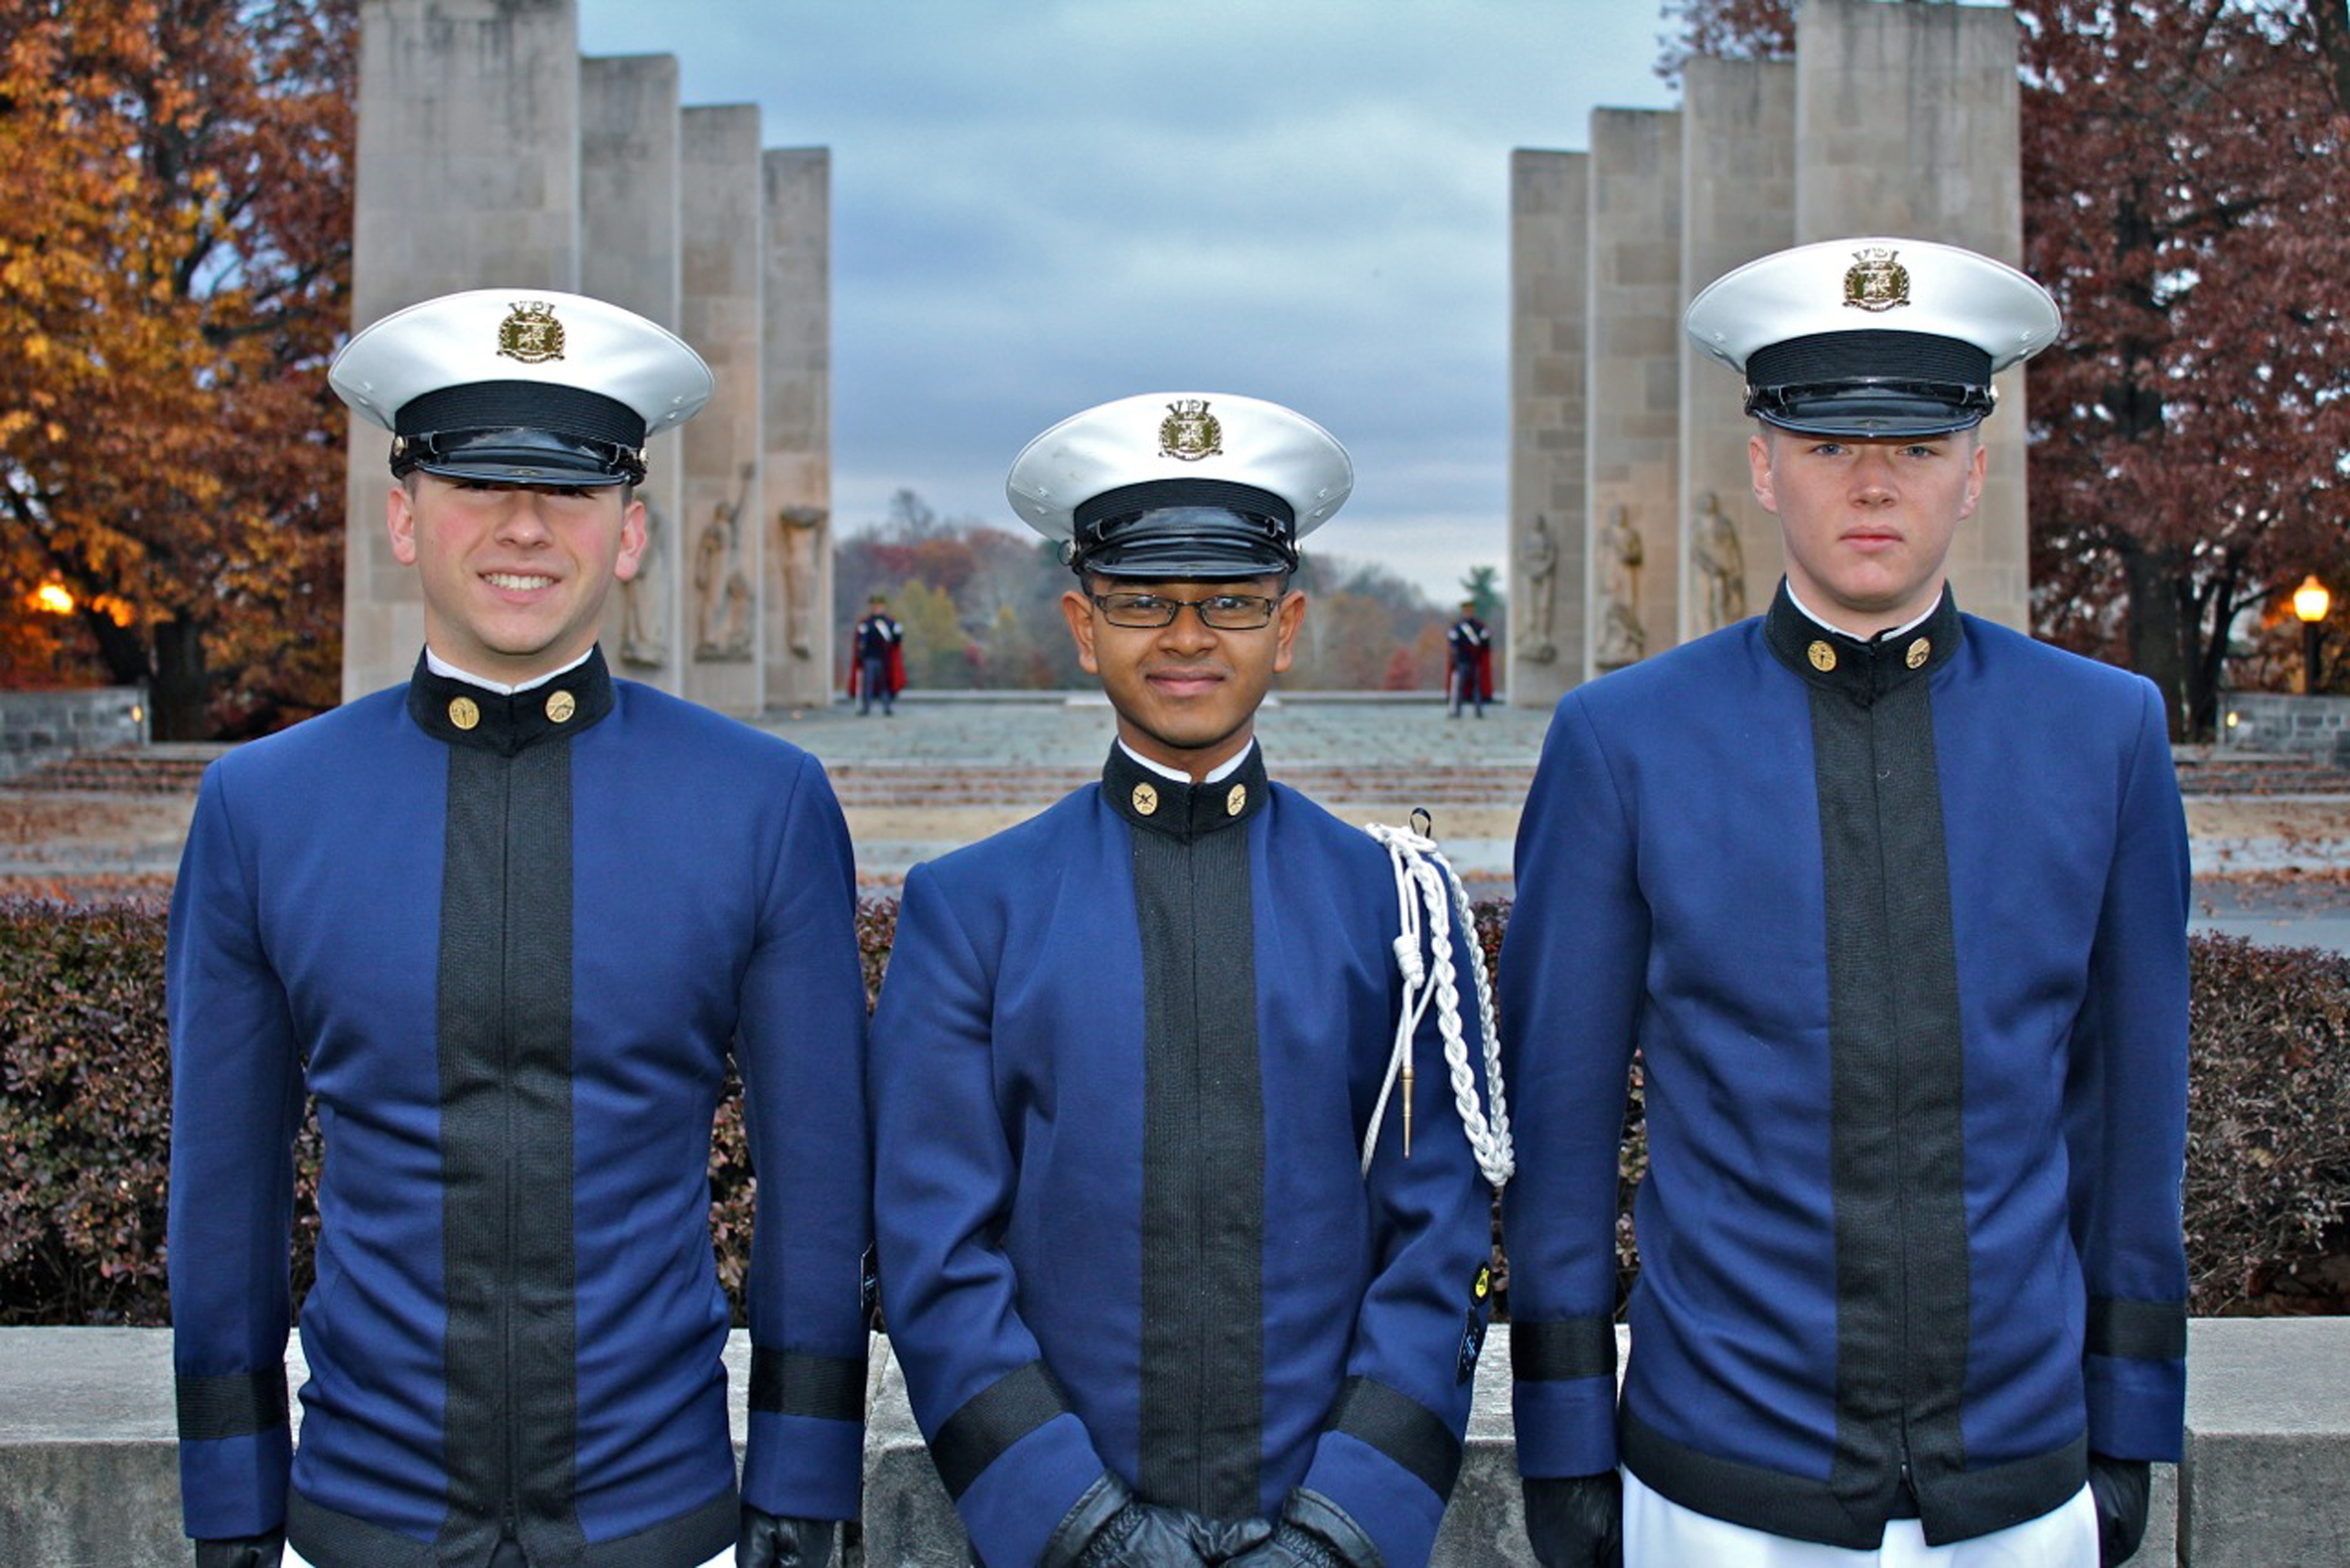 From left to right are Cadets Griffin Shaw, Syed Rumman, and Mark Foster in from of the Pylons